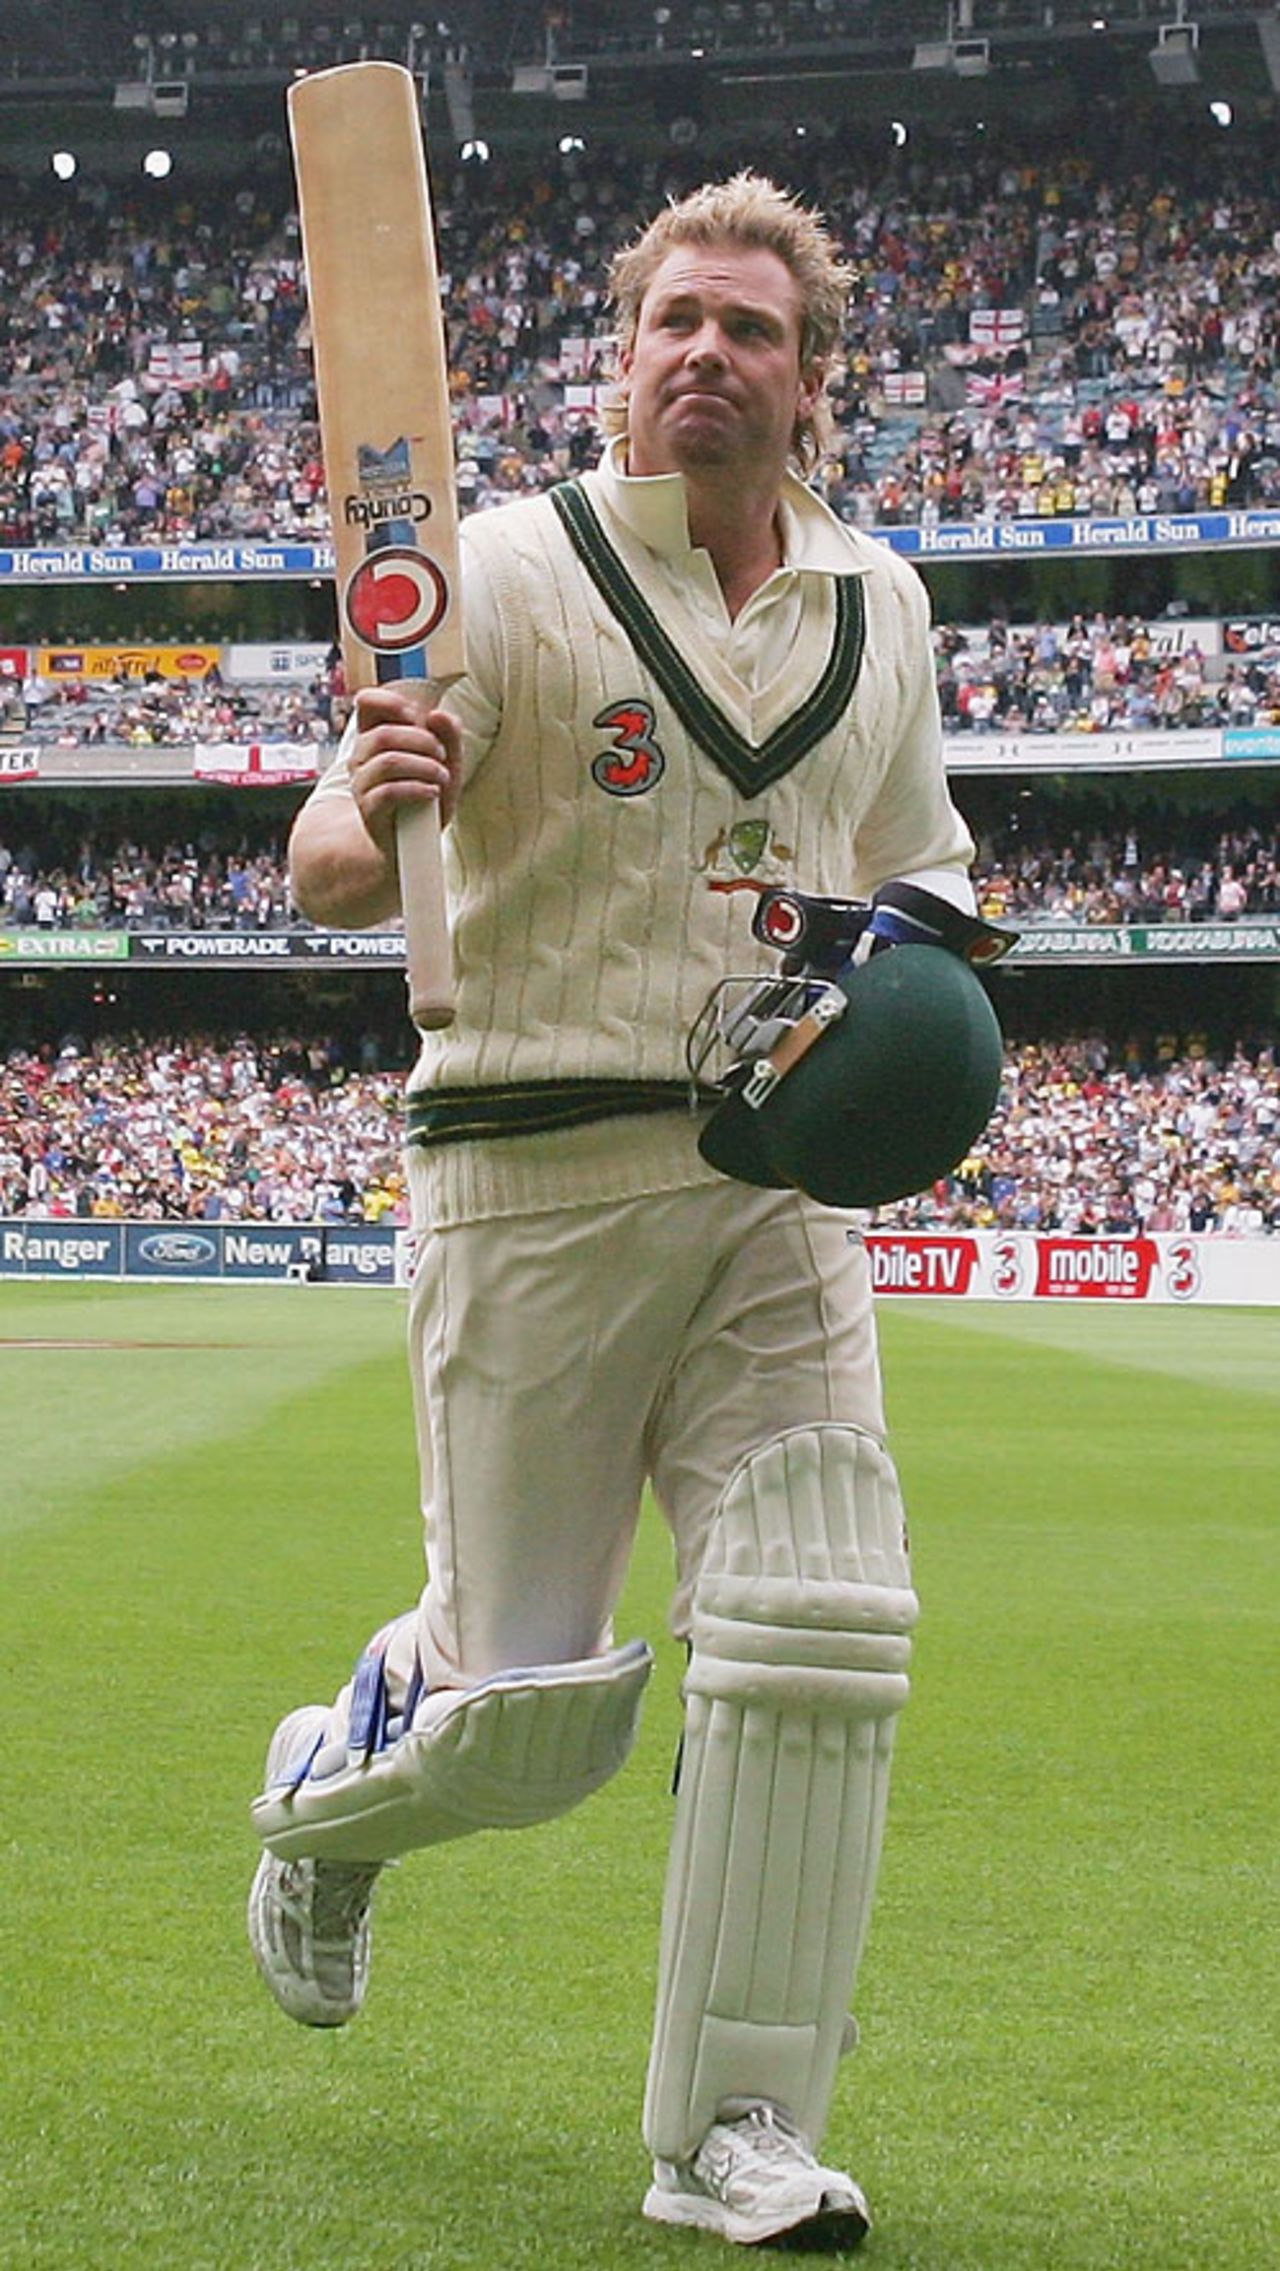 Shane Warne acknowledges applause for his unbeaten 40 in what could be his last innings at the MCG, Australia v England, 4th Test, Melbourne, December 28, 2006